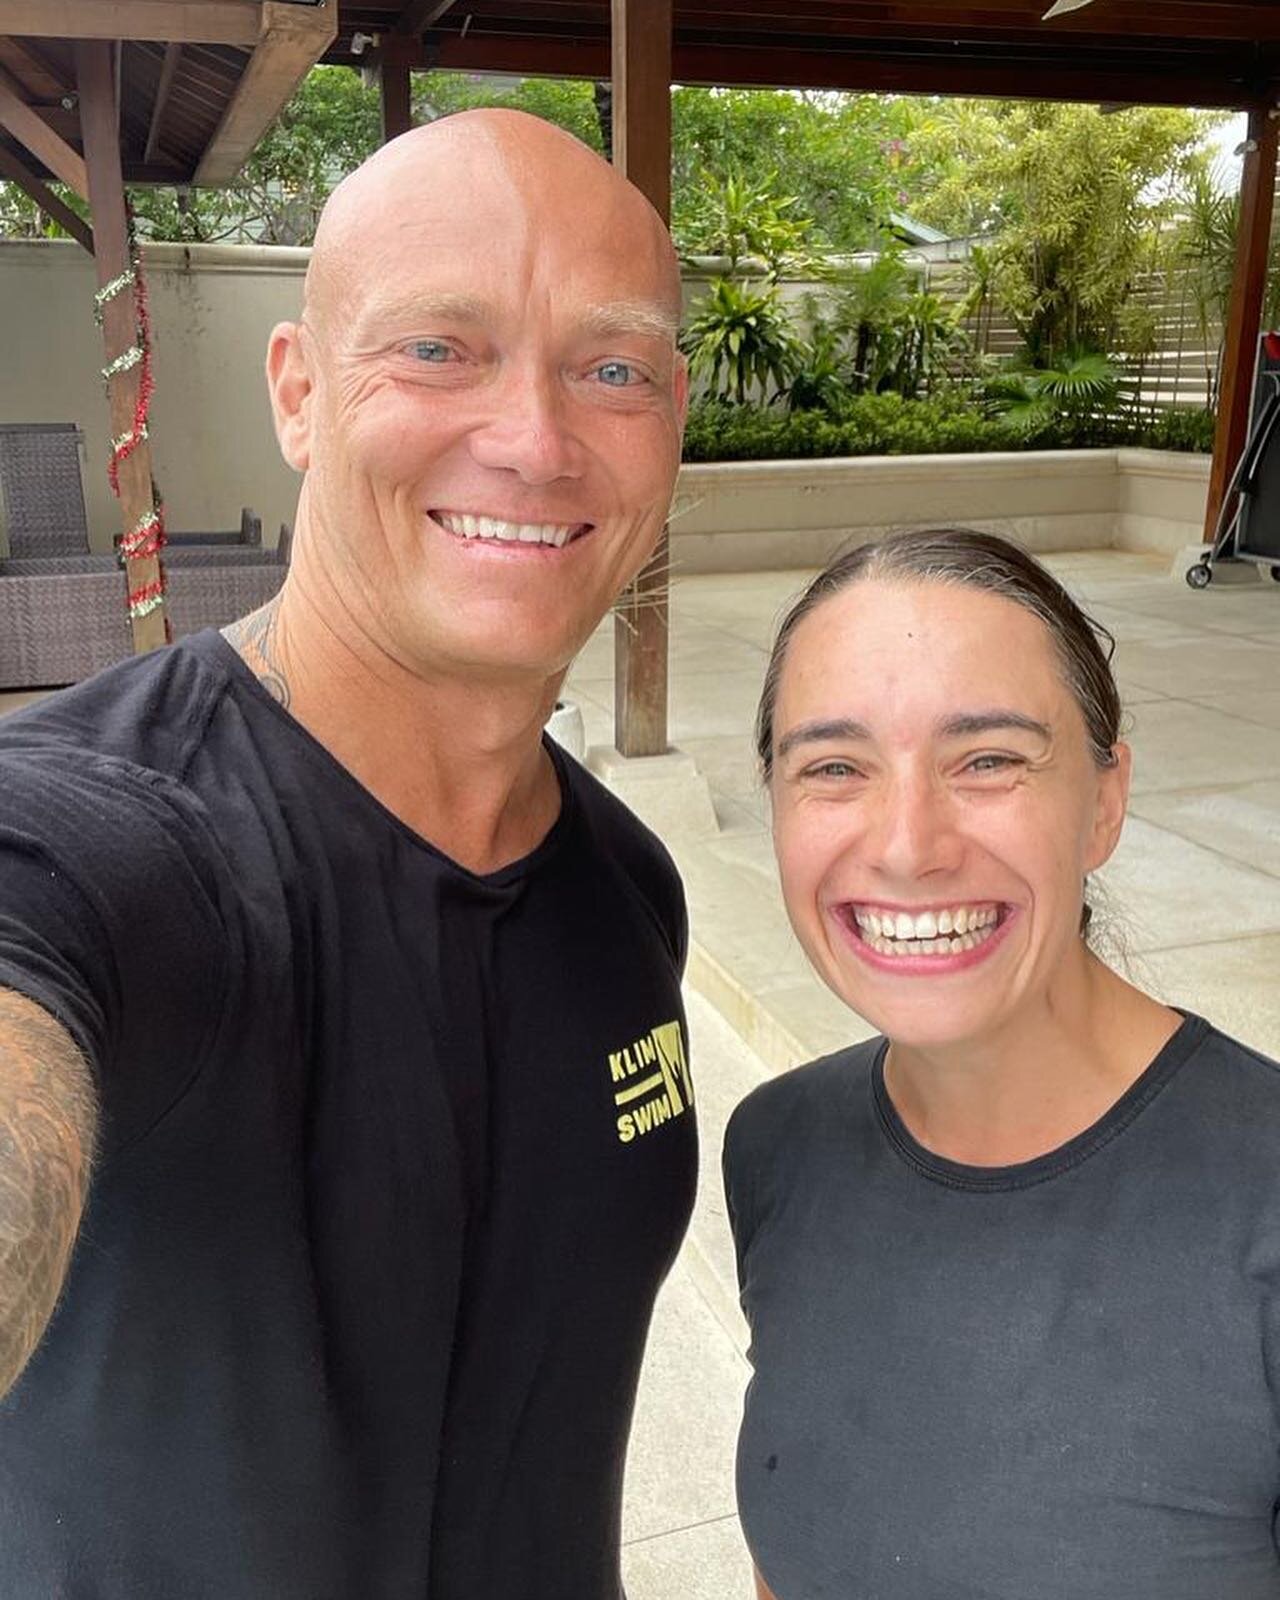 when on holidays in Bali&hellip;you get to ride a scooter to training and reconnect to the joy of swimming.

Thank you @michaelklim1 for welcoming swimnastics to Bali. It was great to meet such a passionate and humble coach. I have had a few say it i